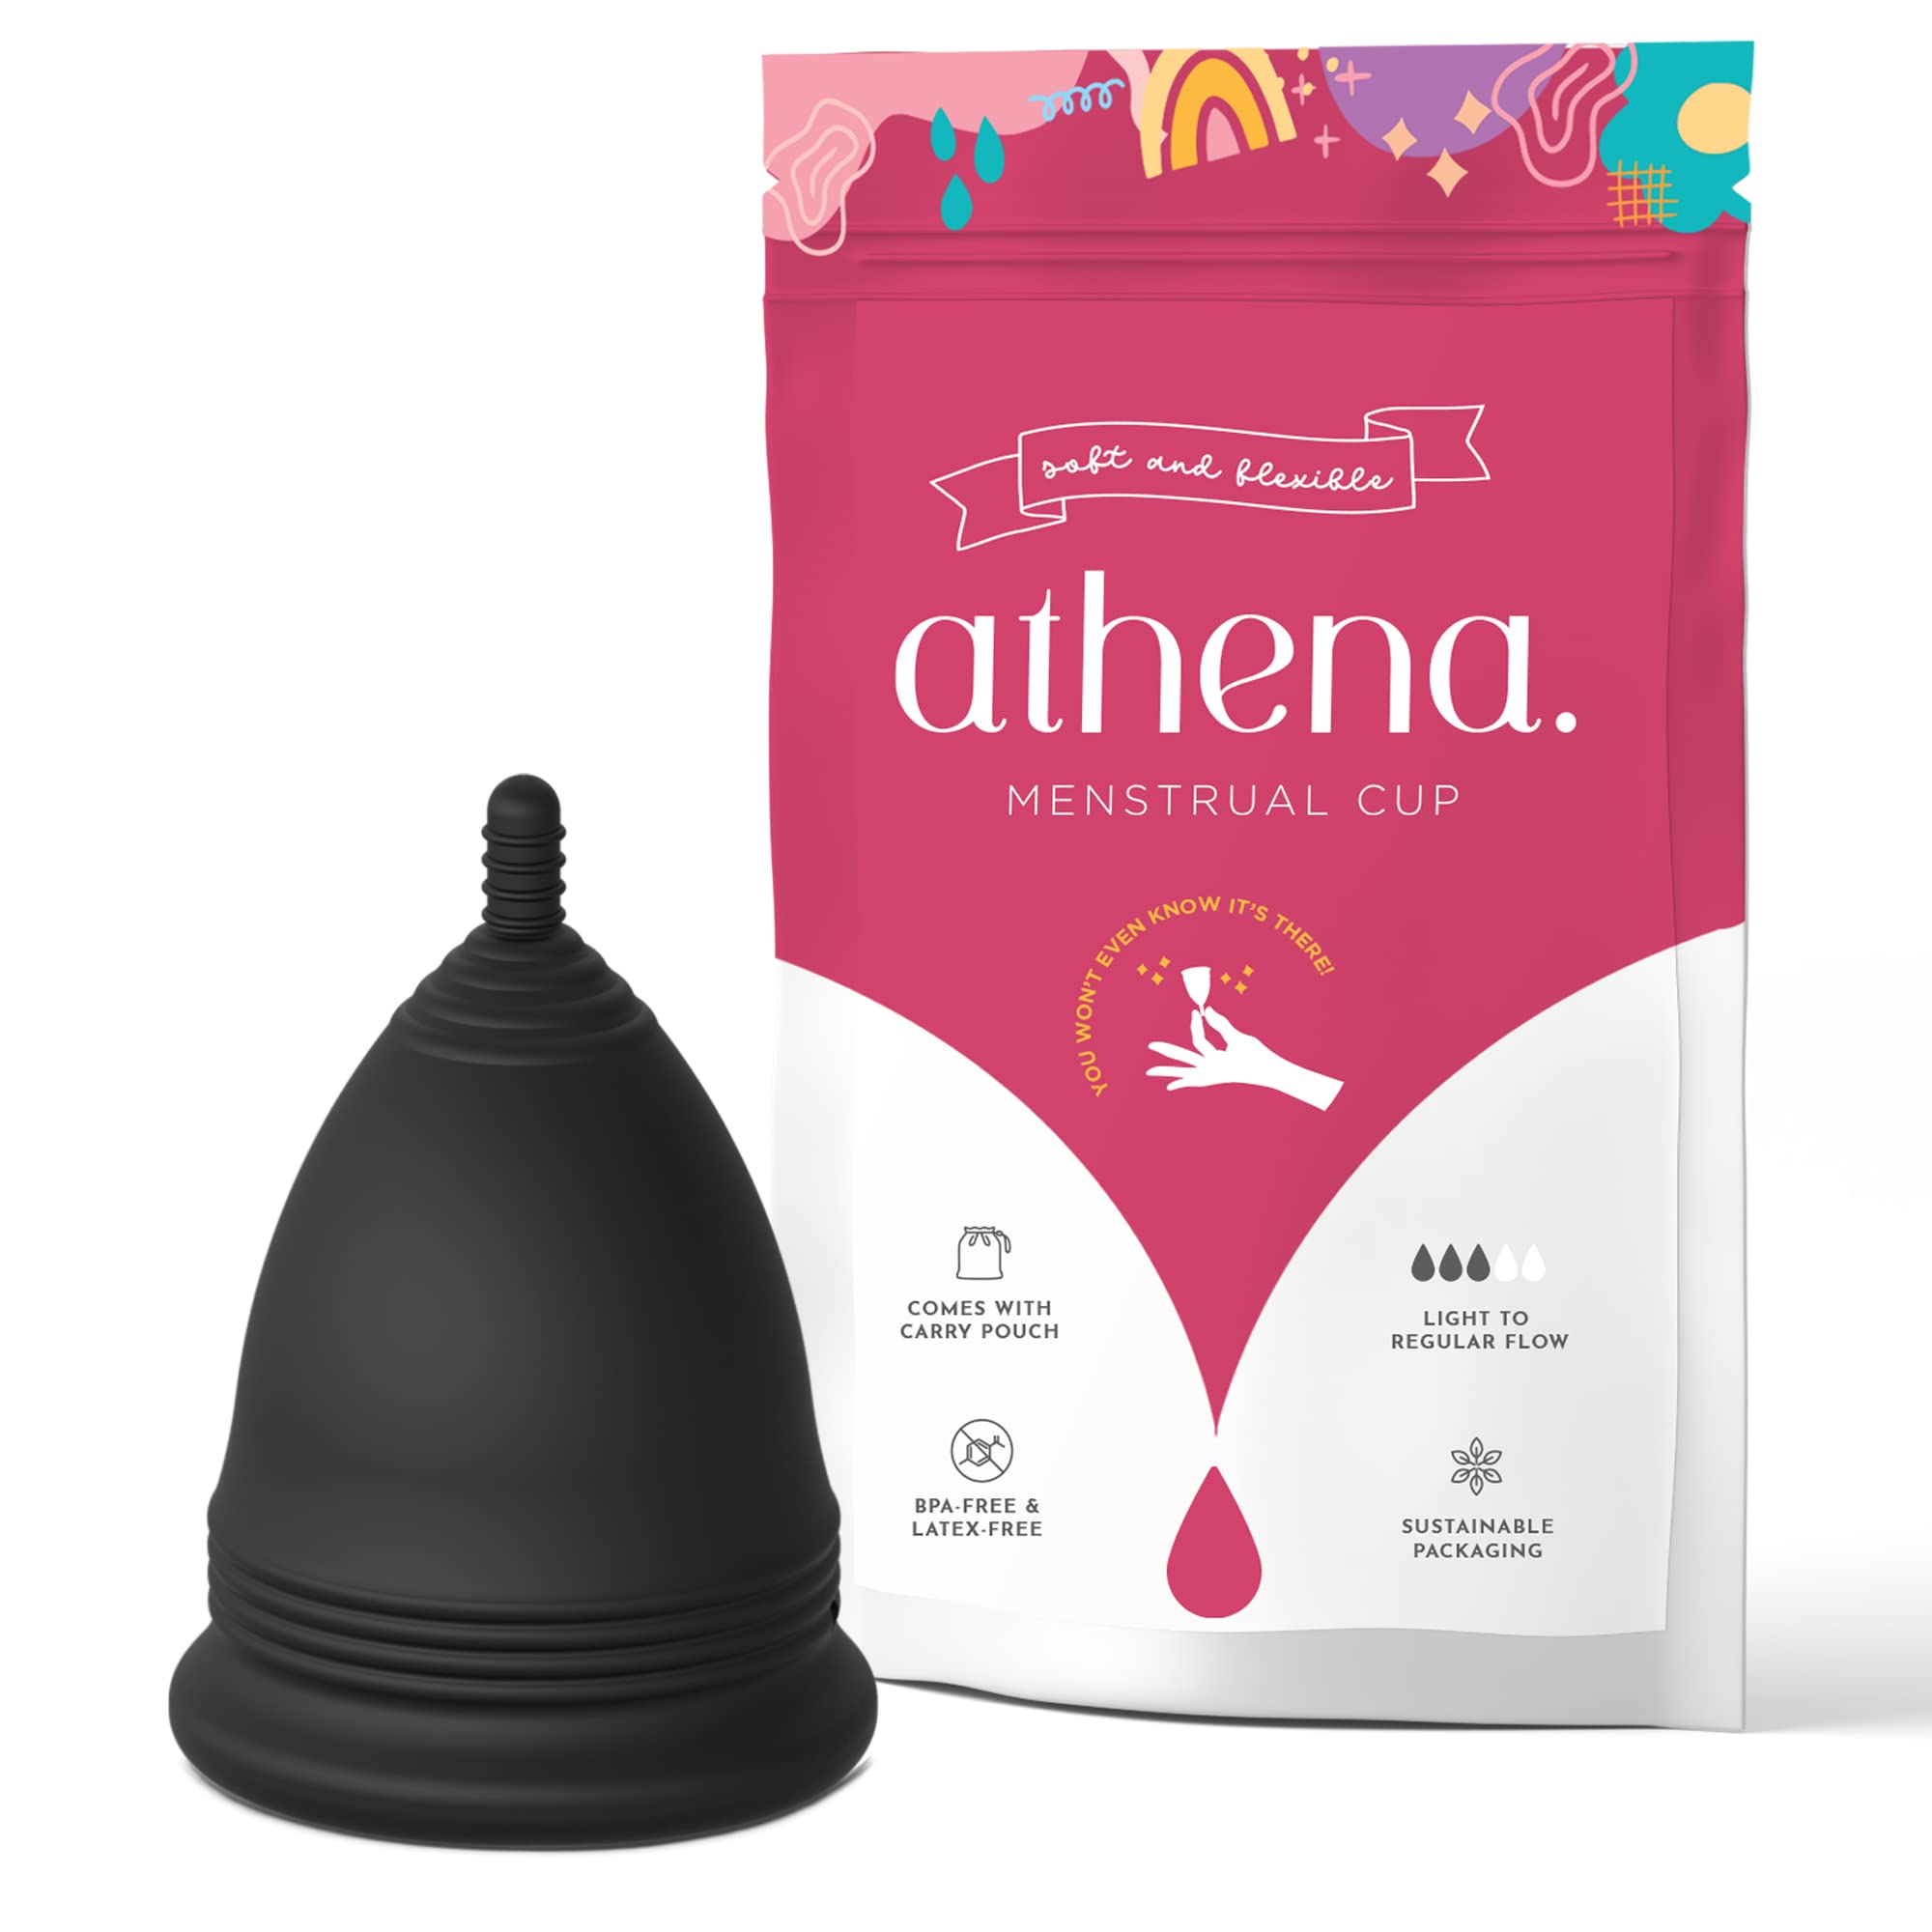 Athena Cup - The Original Softer Reusable Period Cup Made for Comfort - Perfect Menstruation Cup for Beginner to Experienced Users - Easy to Use Tampon and Pad Alternative Large (Pack